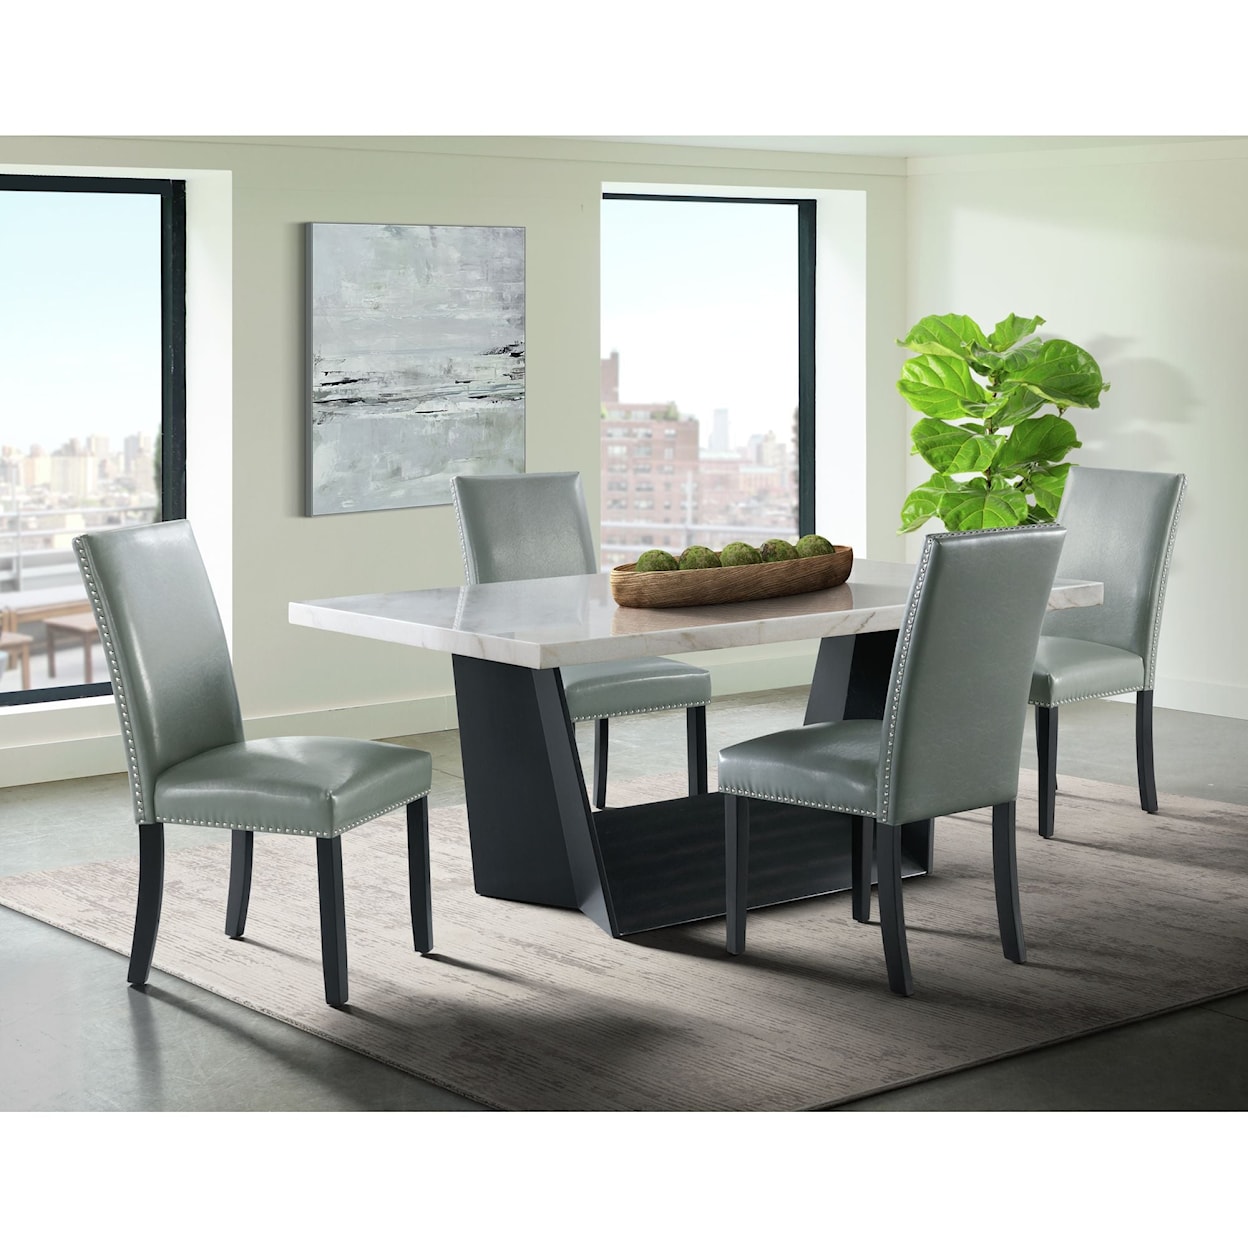 Elements International Beckley Dining Table with Marble Top